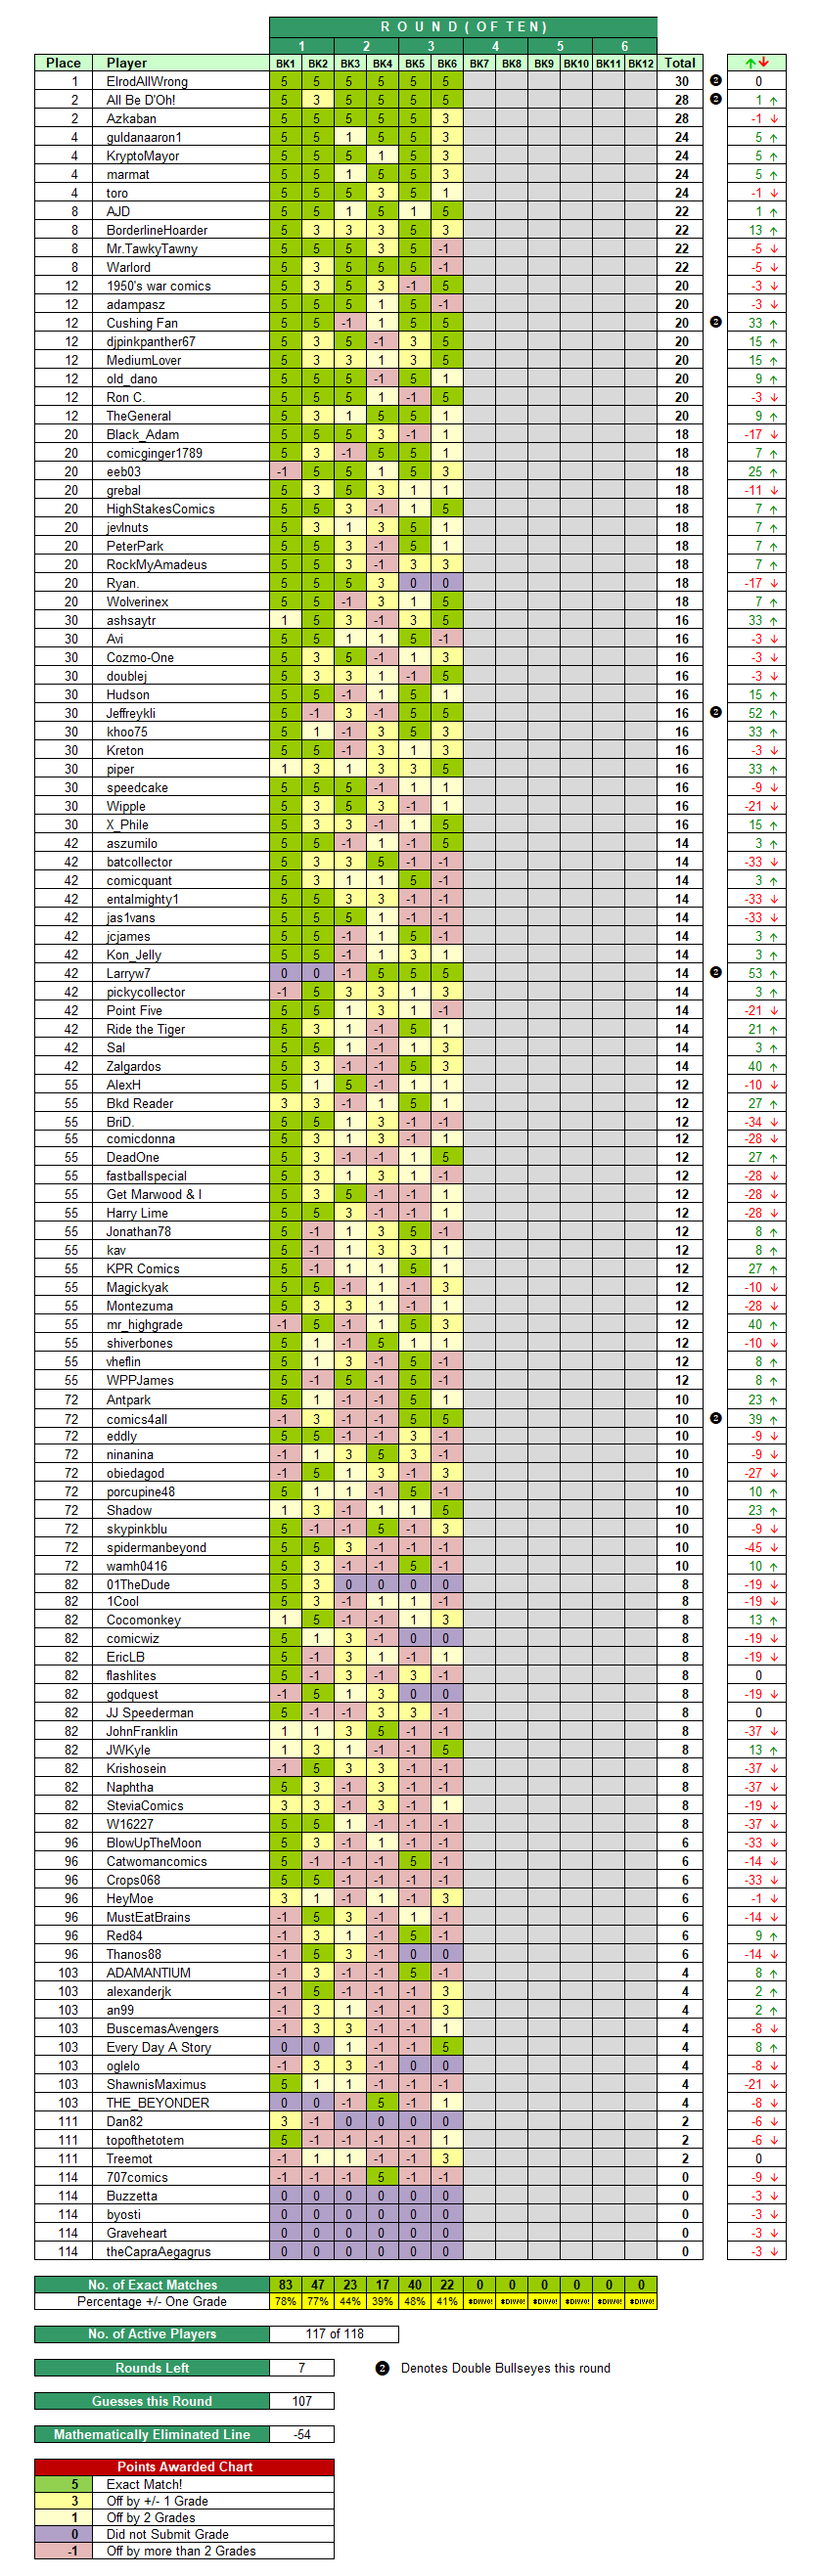 Round-3-Leaderboard.png